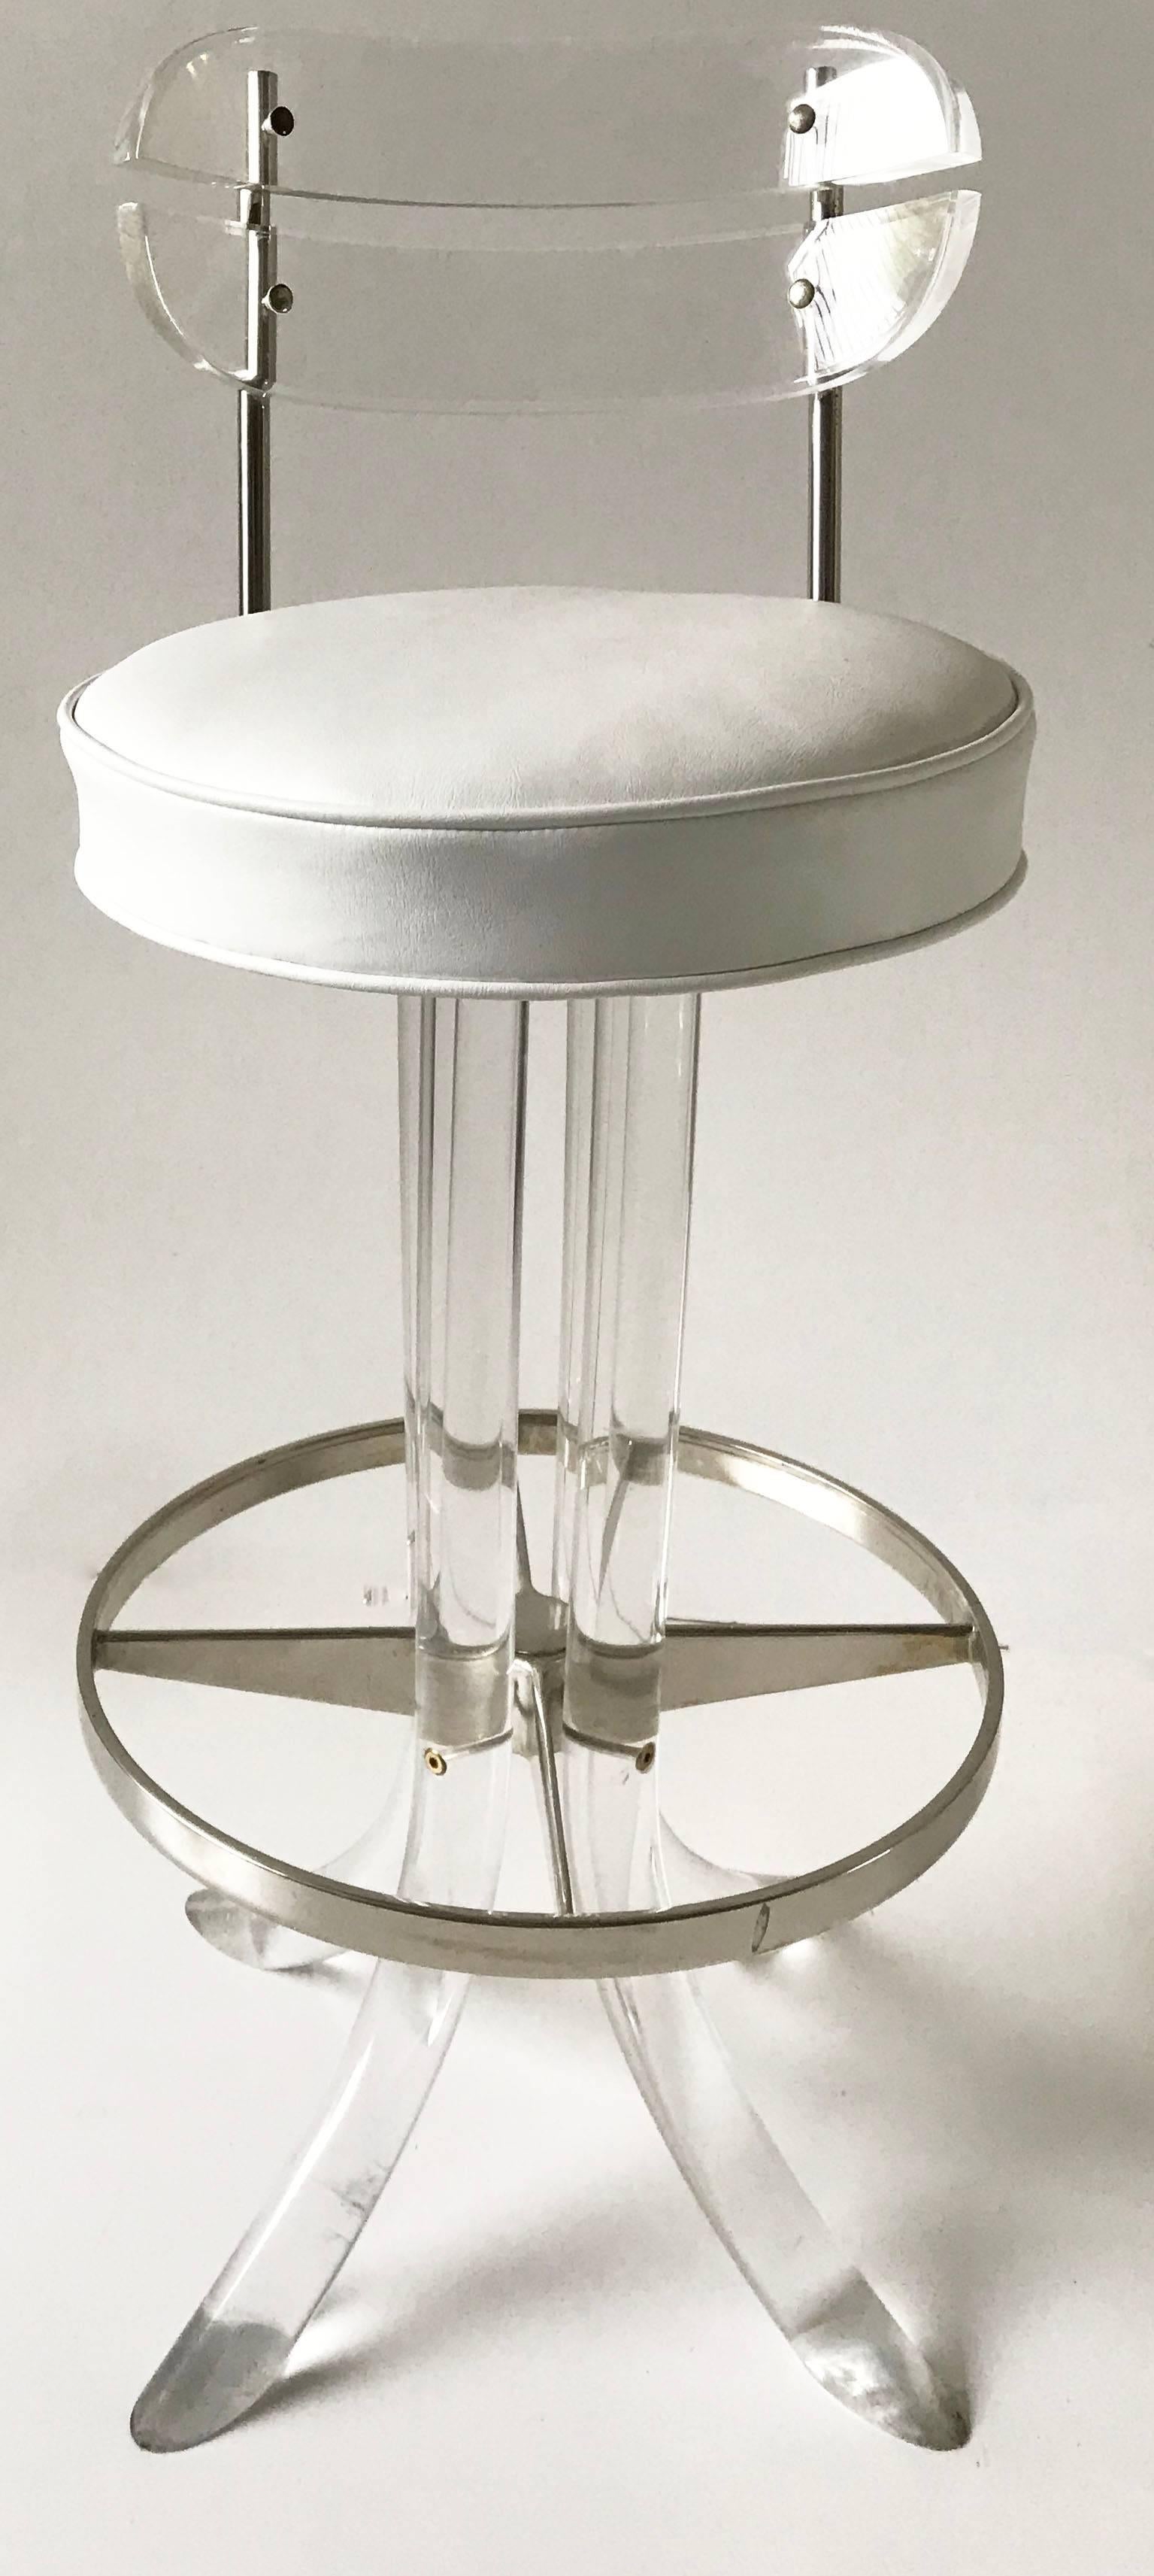 Set of Seven Hill manufacturing barstools Lucite and chrome with white vinyl seat top
Measures: High seat: 28.5